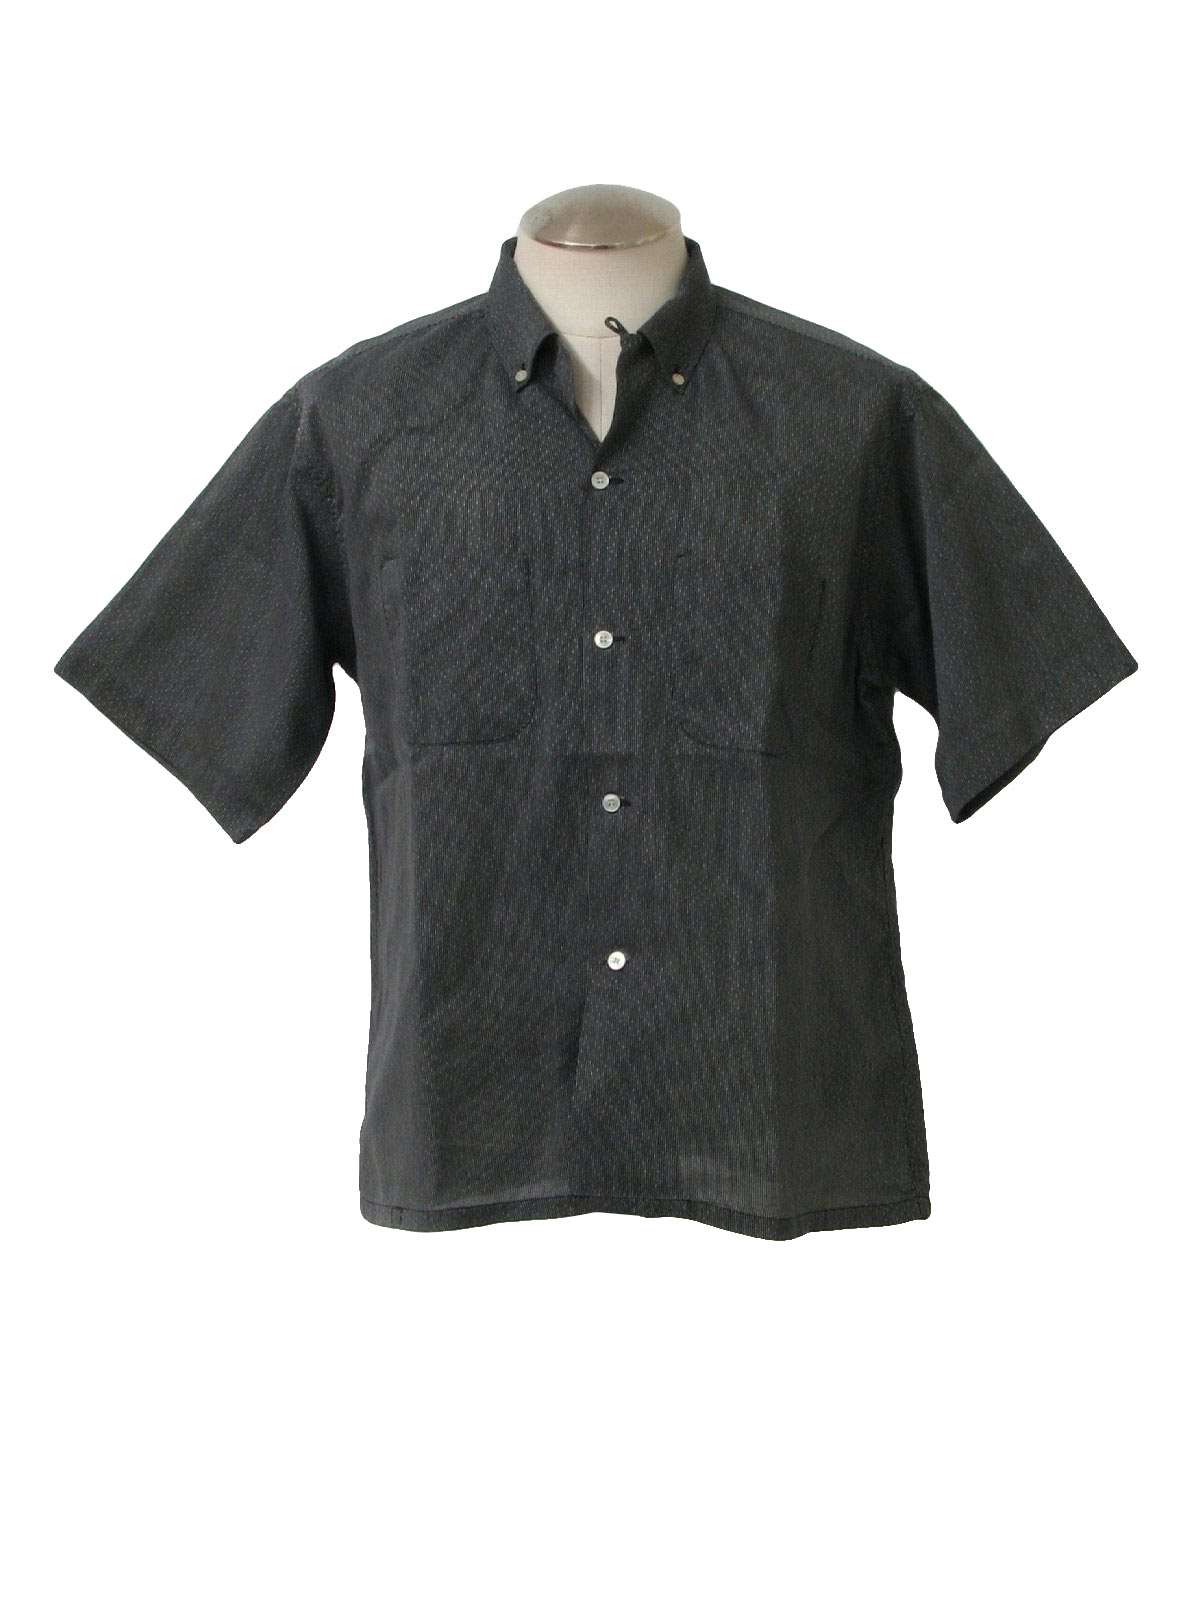 Penneys Town craft 50's Vintage Shirt: Late 50s -Penneys Town craft ...